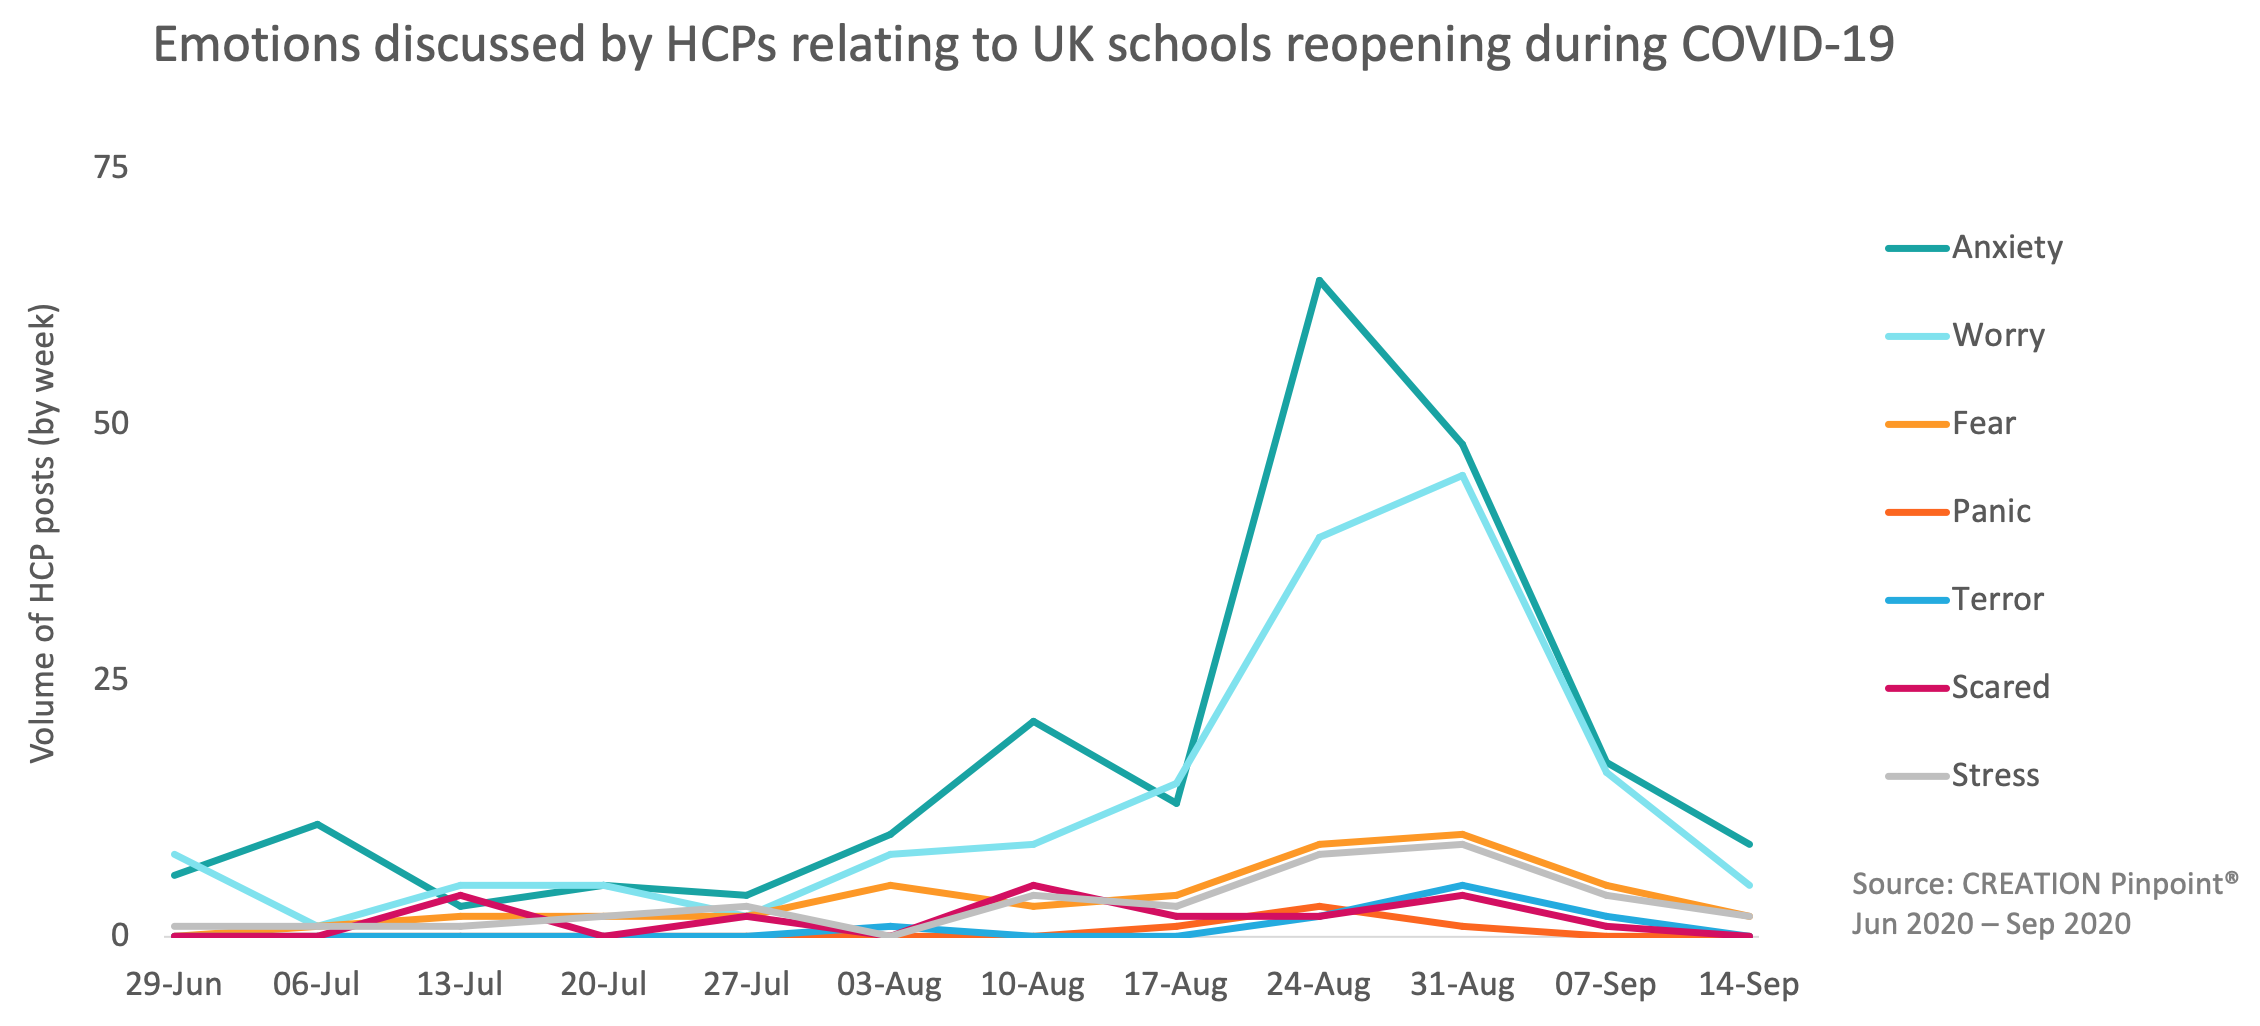 Emotions discussed by HCPs relating to UK schools reopening during COVID-19